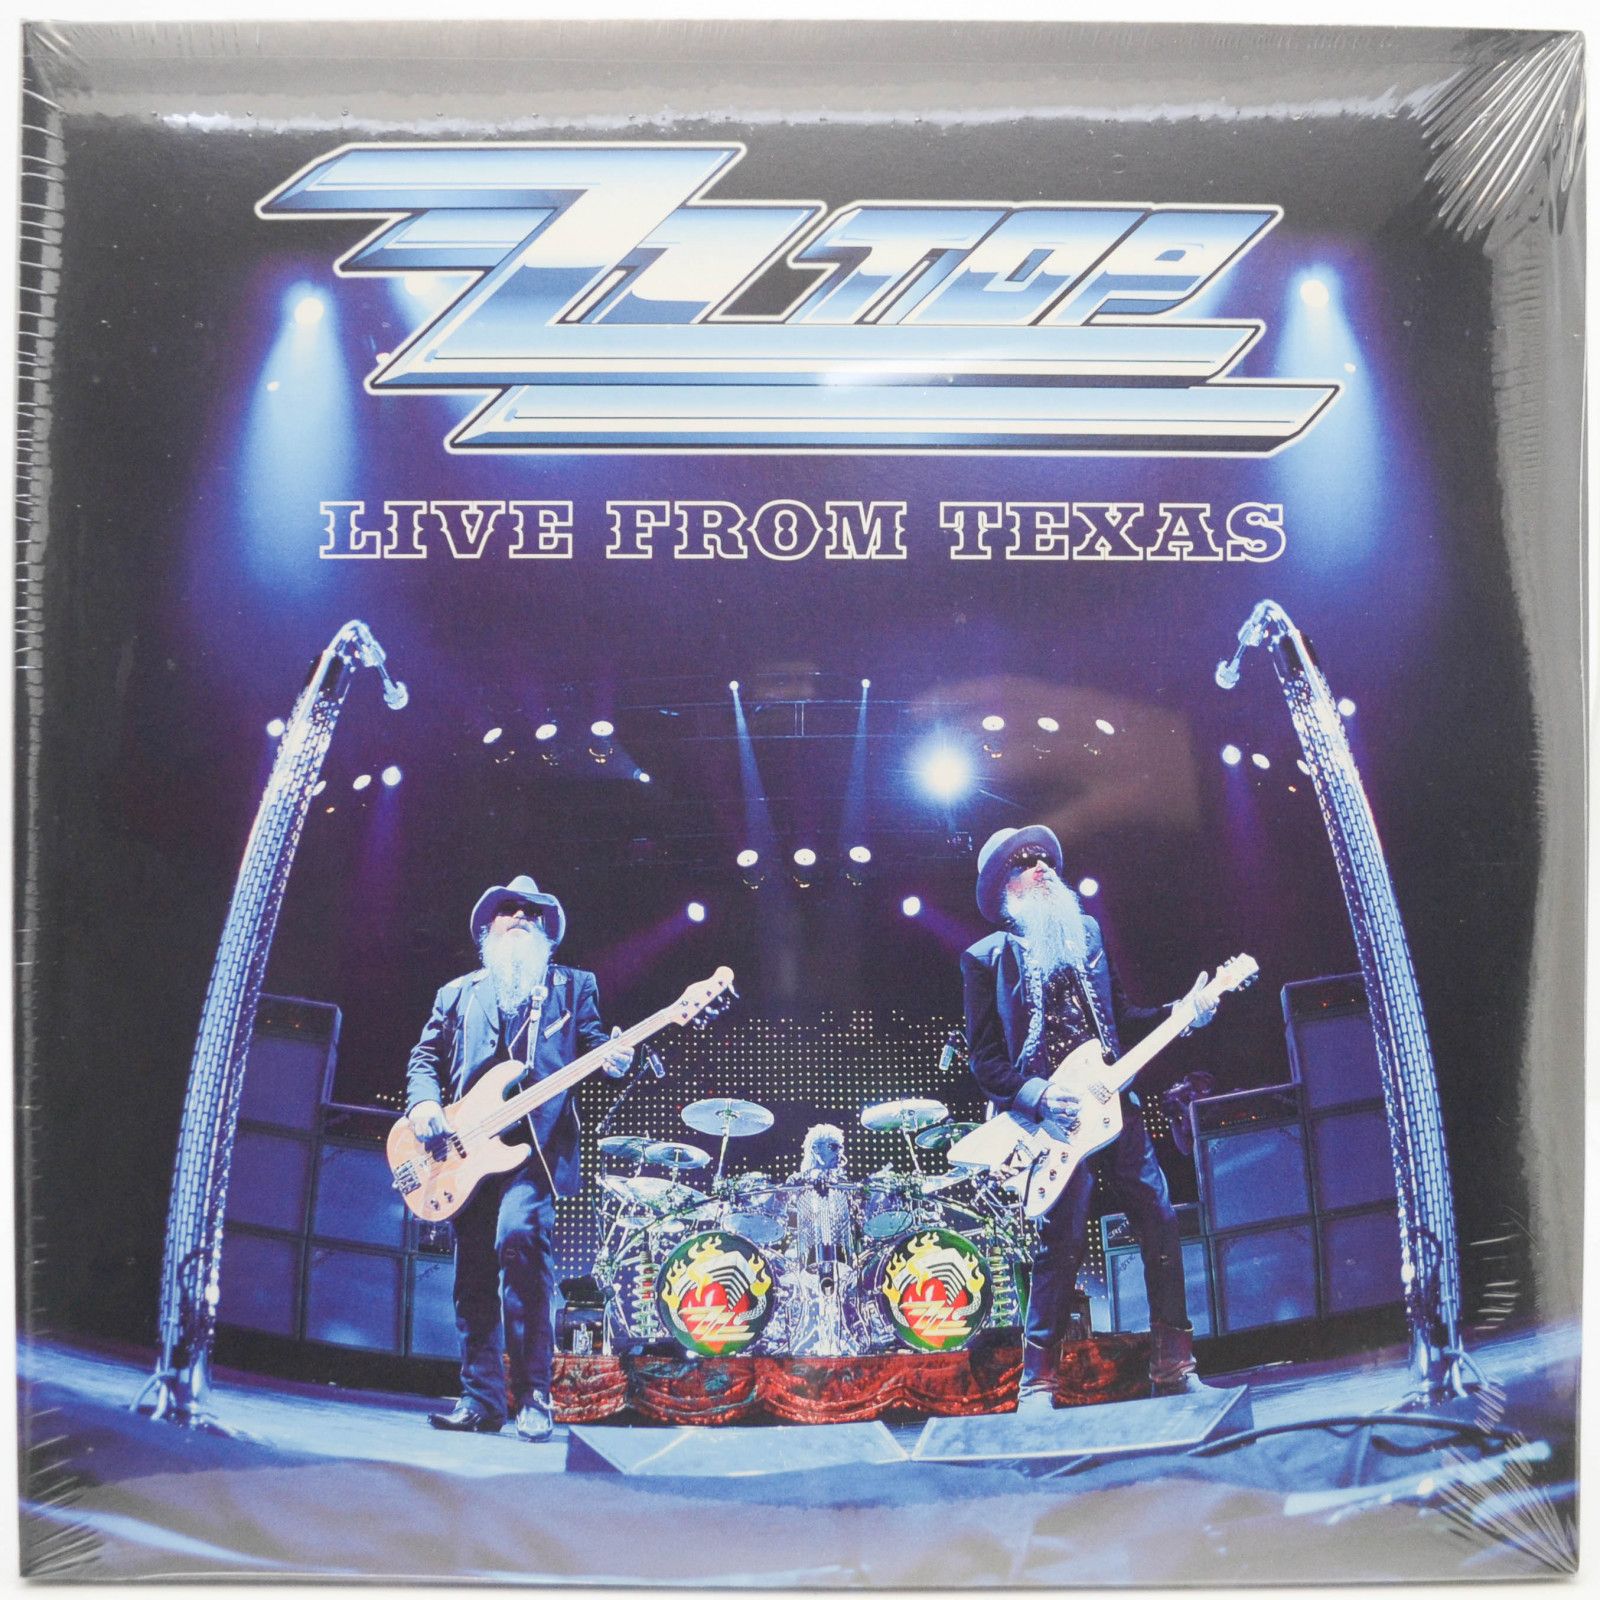 ZZ Top — Live From Texas (2LP), 2008